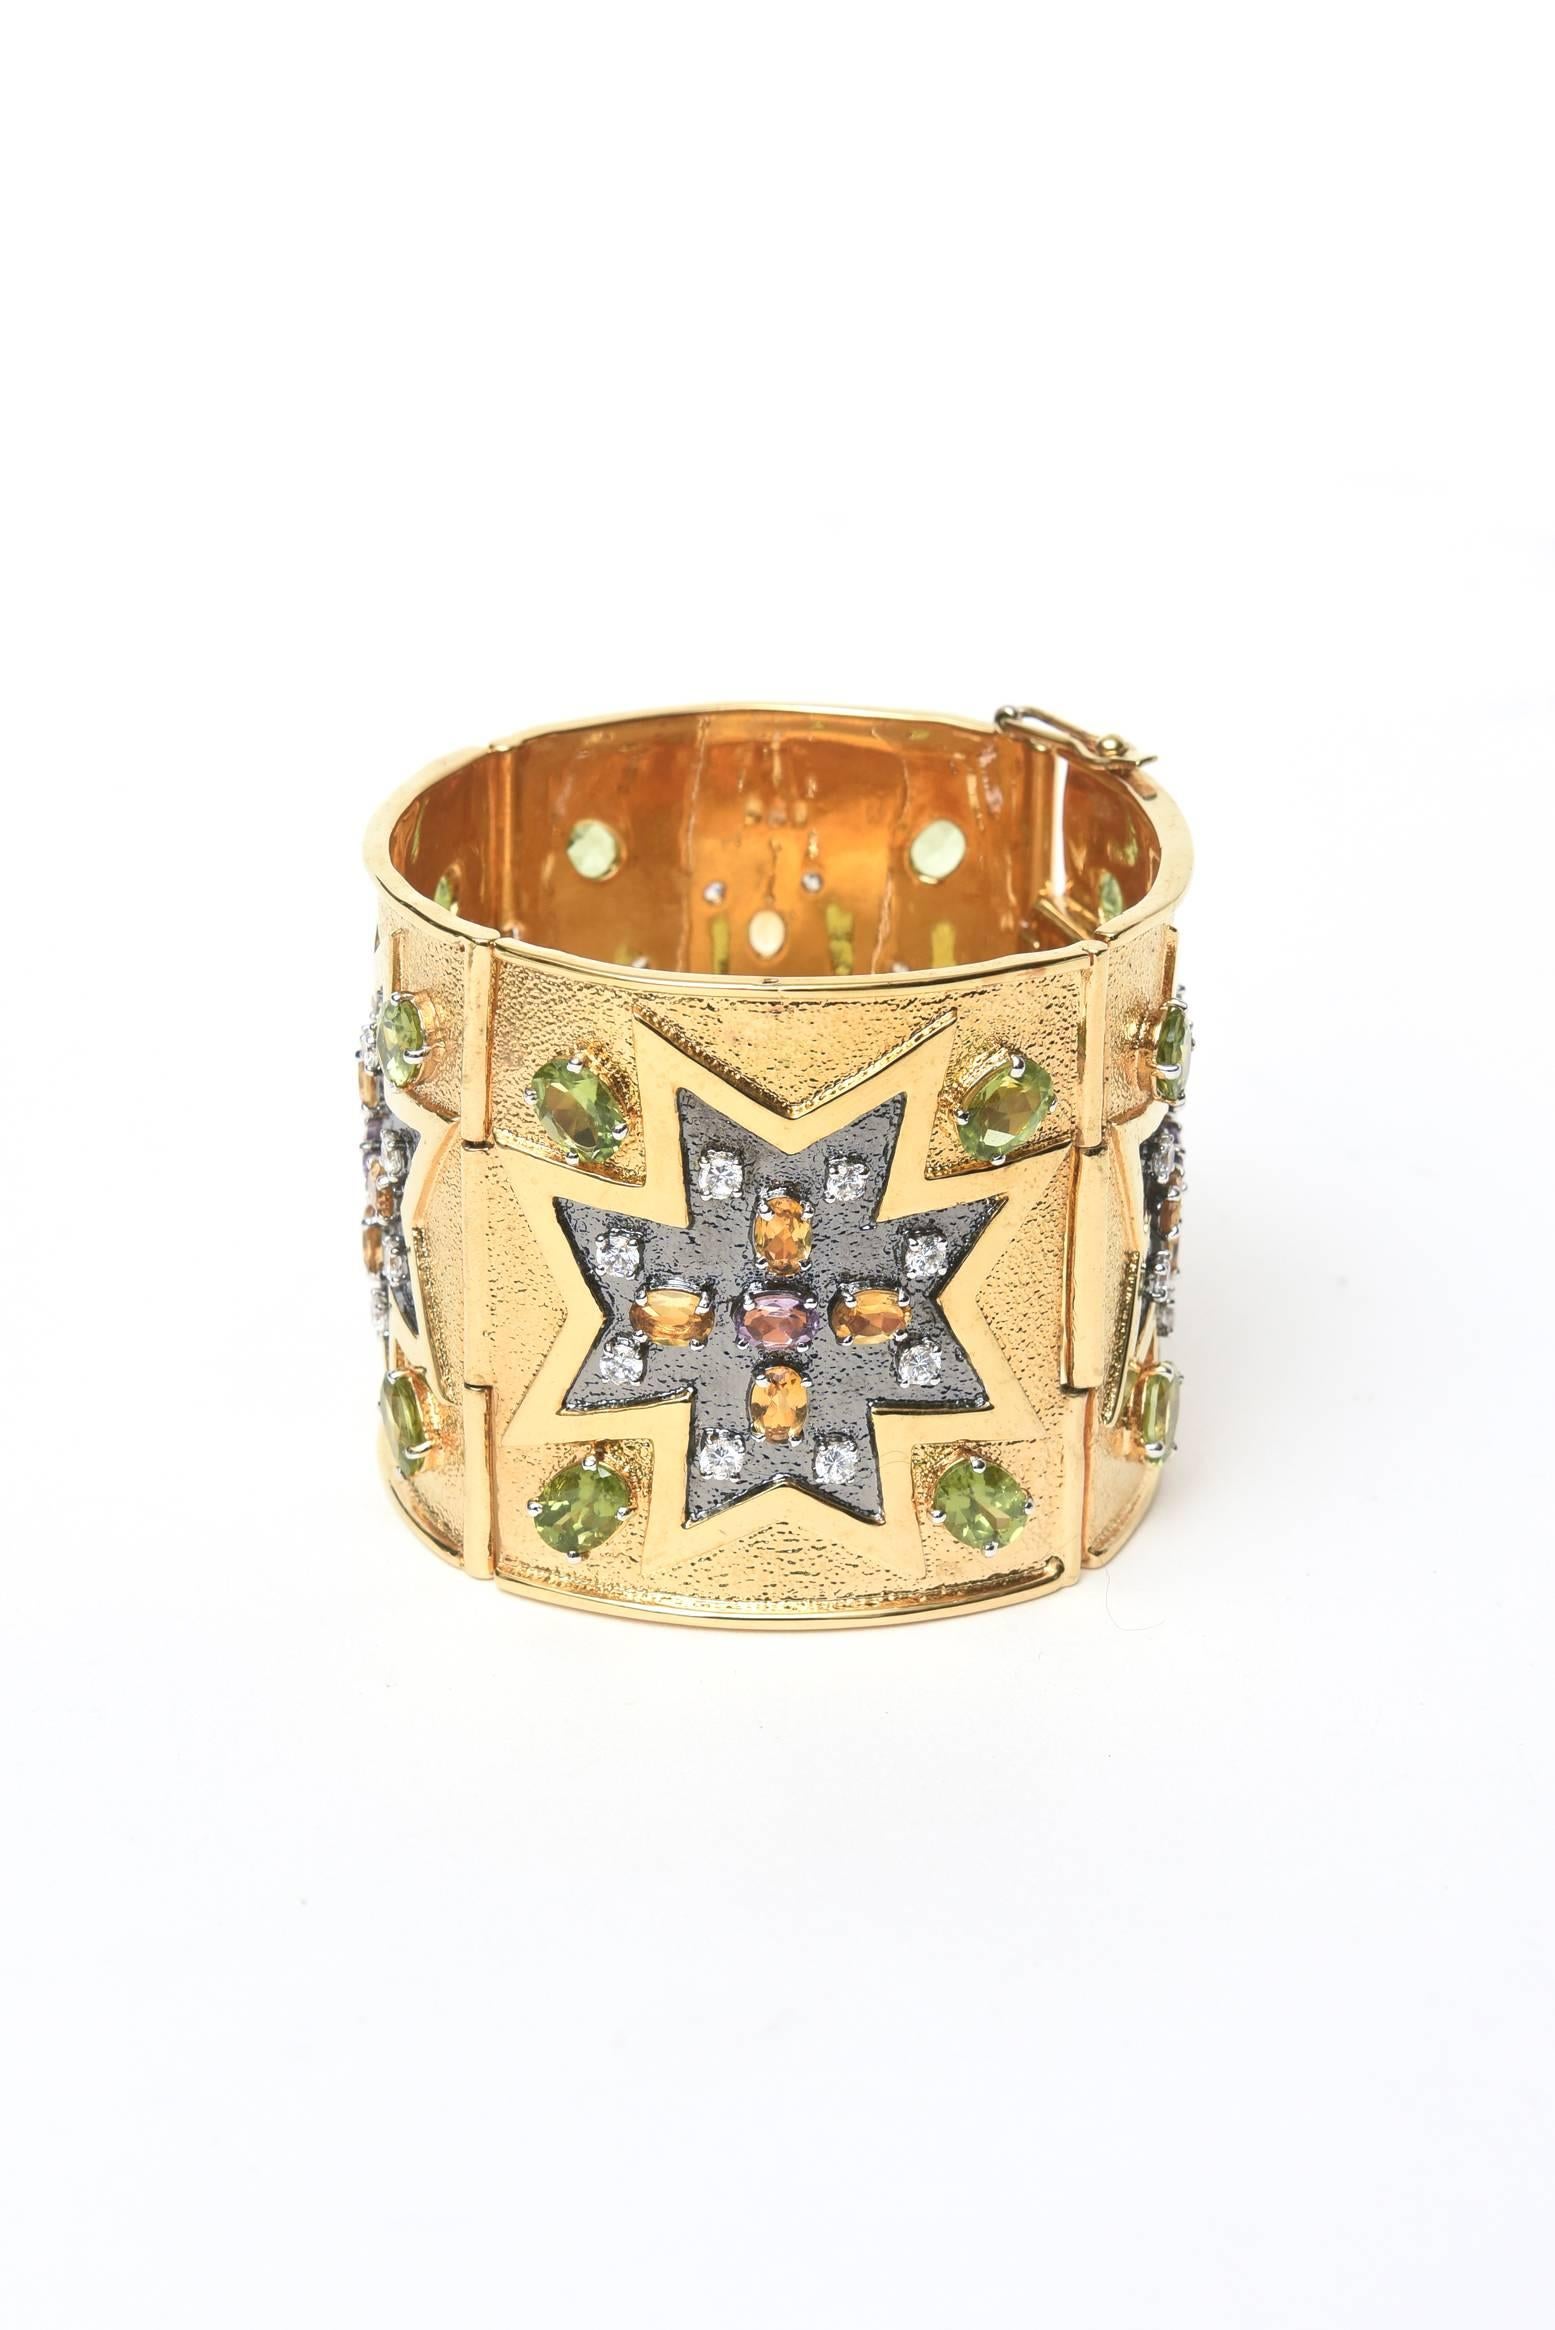 This stunning and dramatic wide cuff bracelet has 4 panels of designs of stones of amethyst, citrine, peridot and rhinestones in a star like formation. It is gold plated over sterling silver. It is most likely one of a kind. The array of colors and